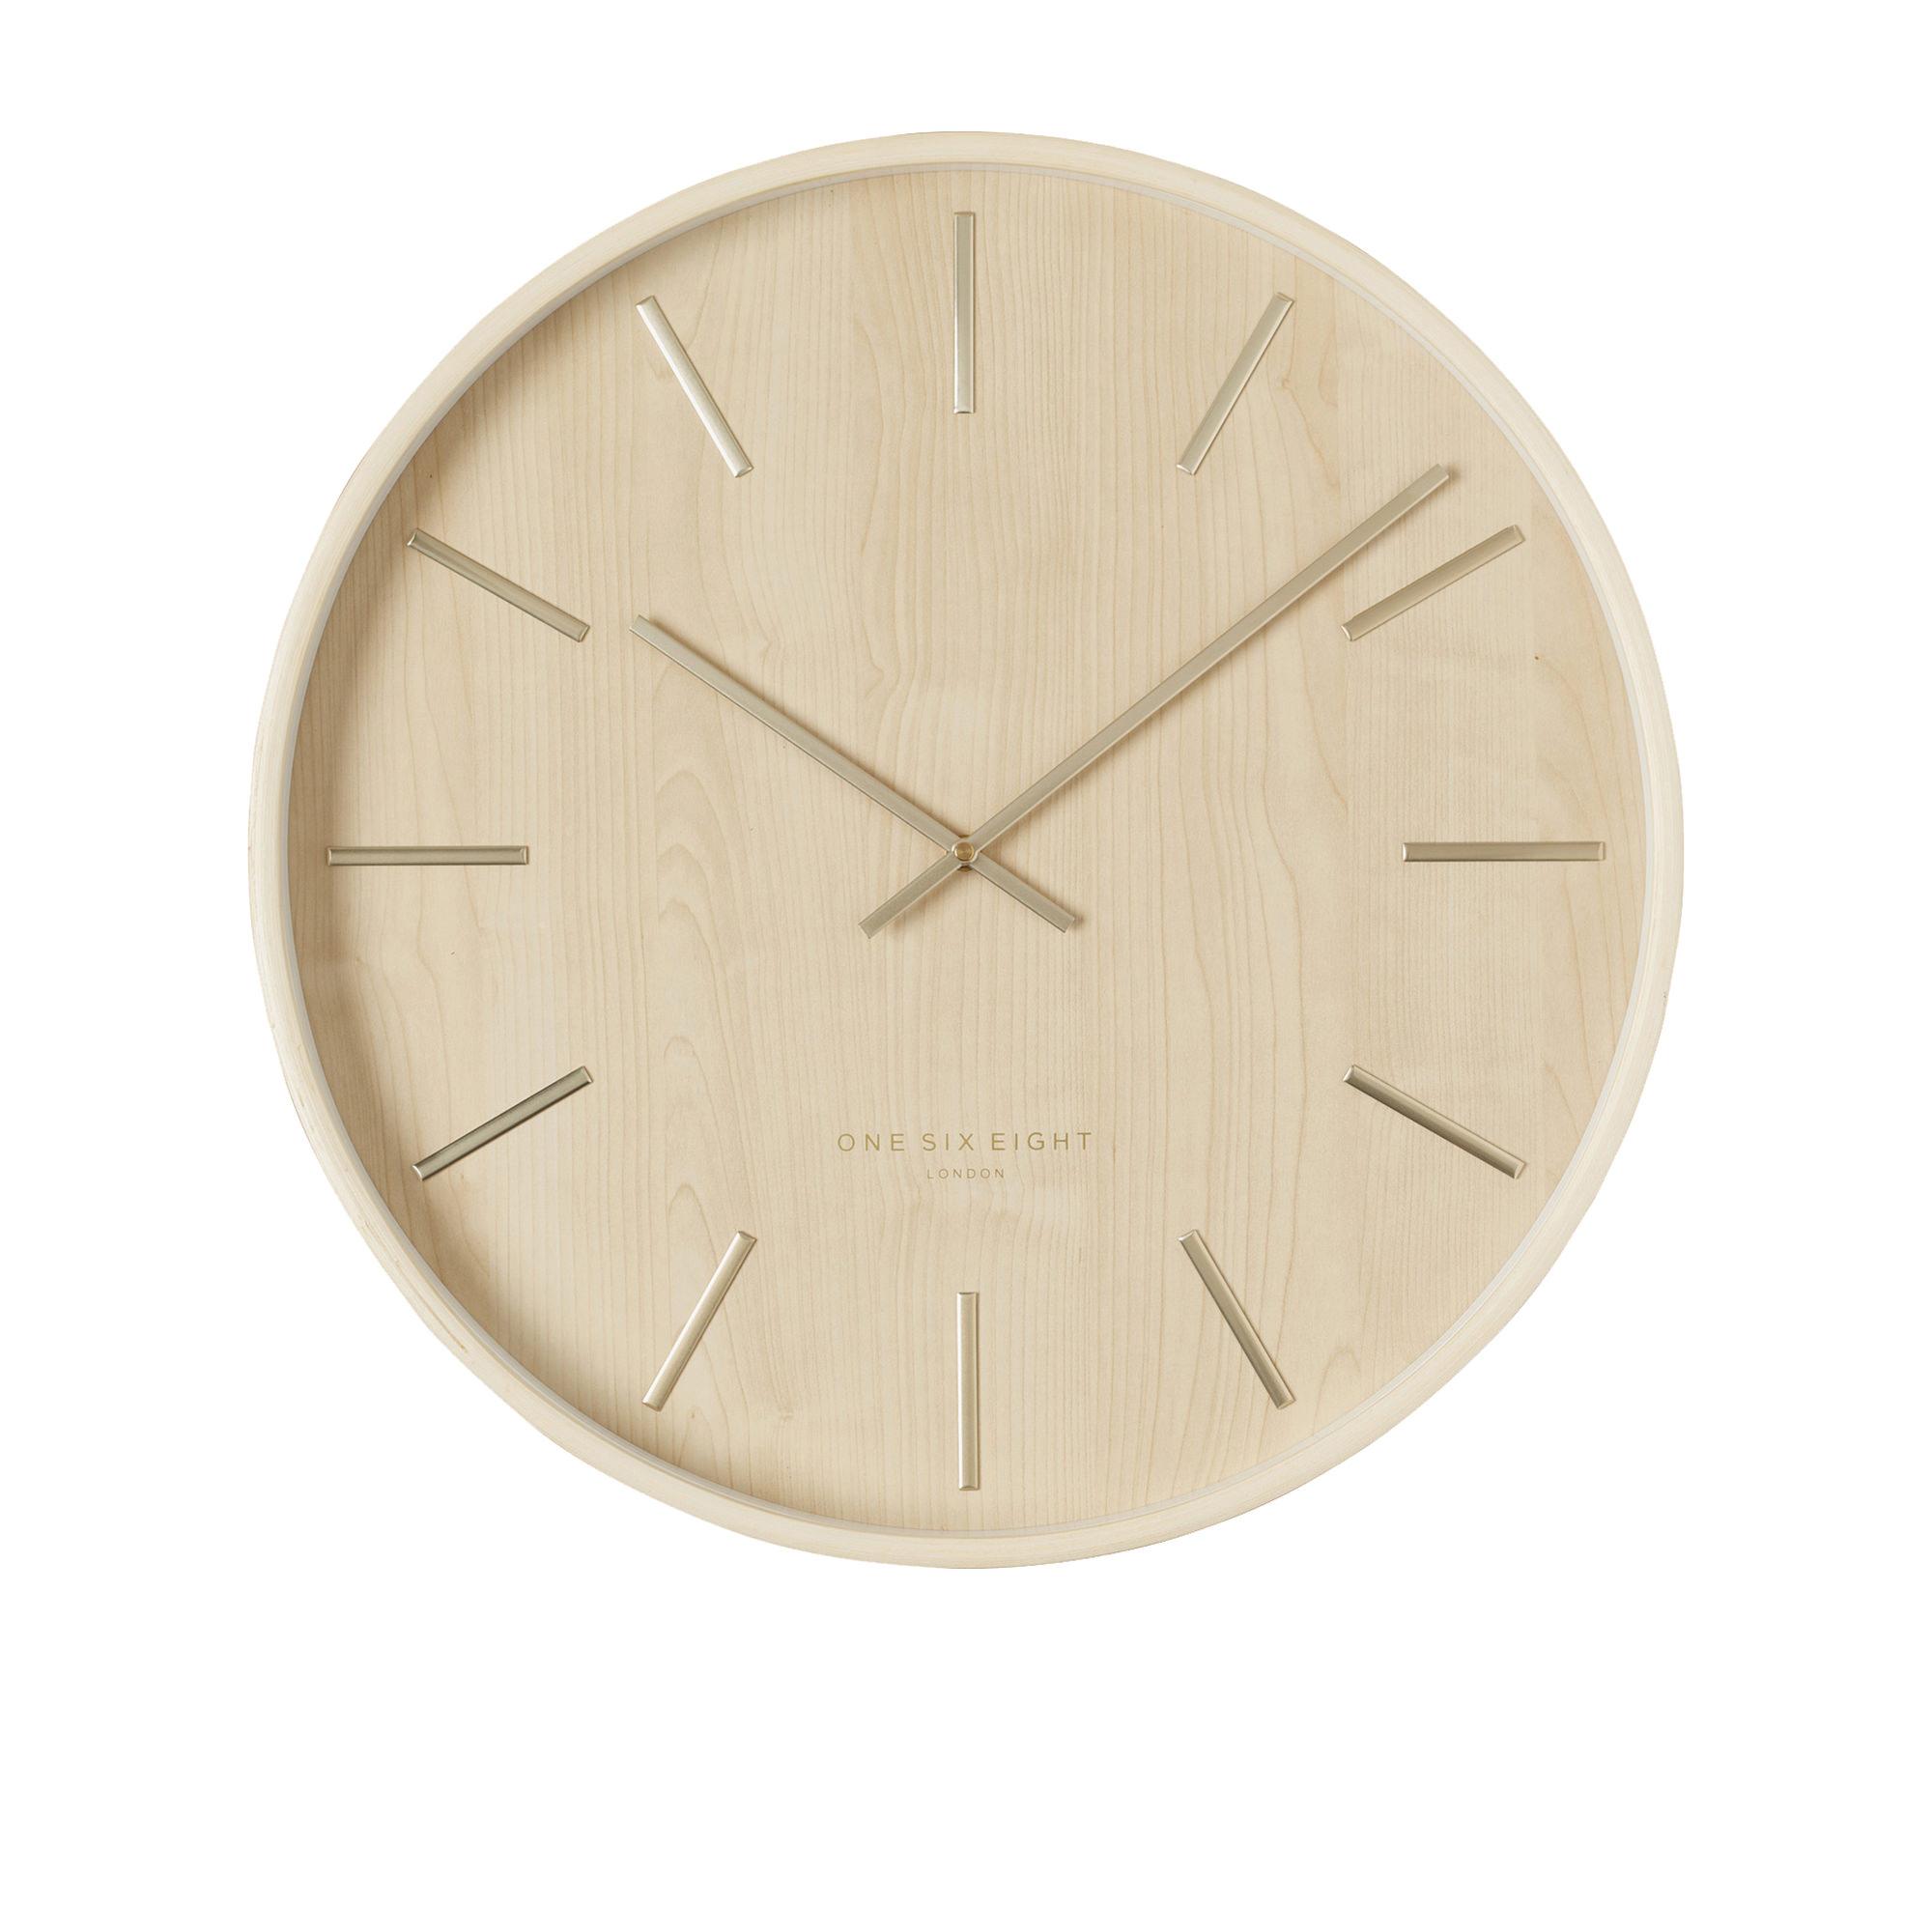 One Six Eight London Marcus Wall Clock 51cm Natural Wood Image 1